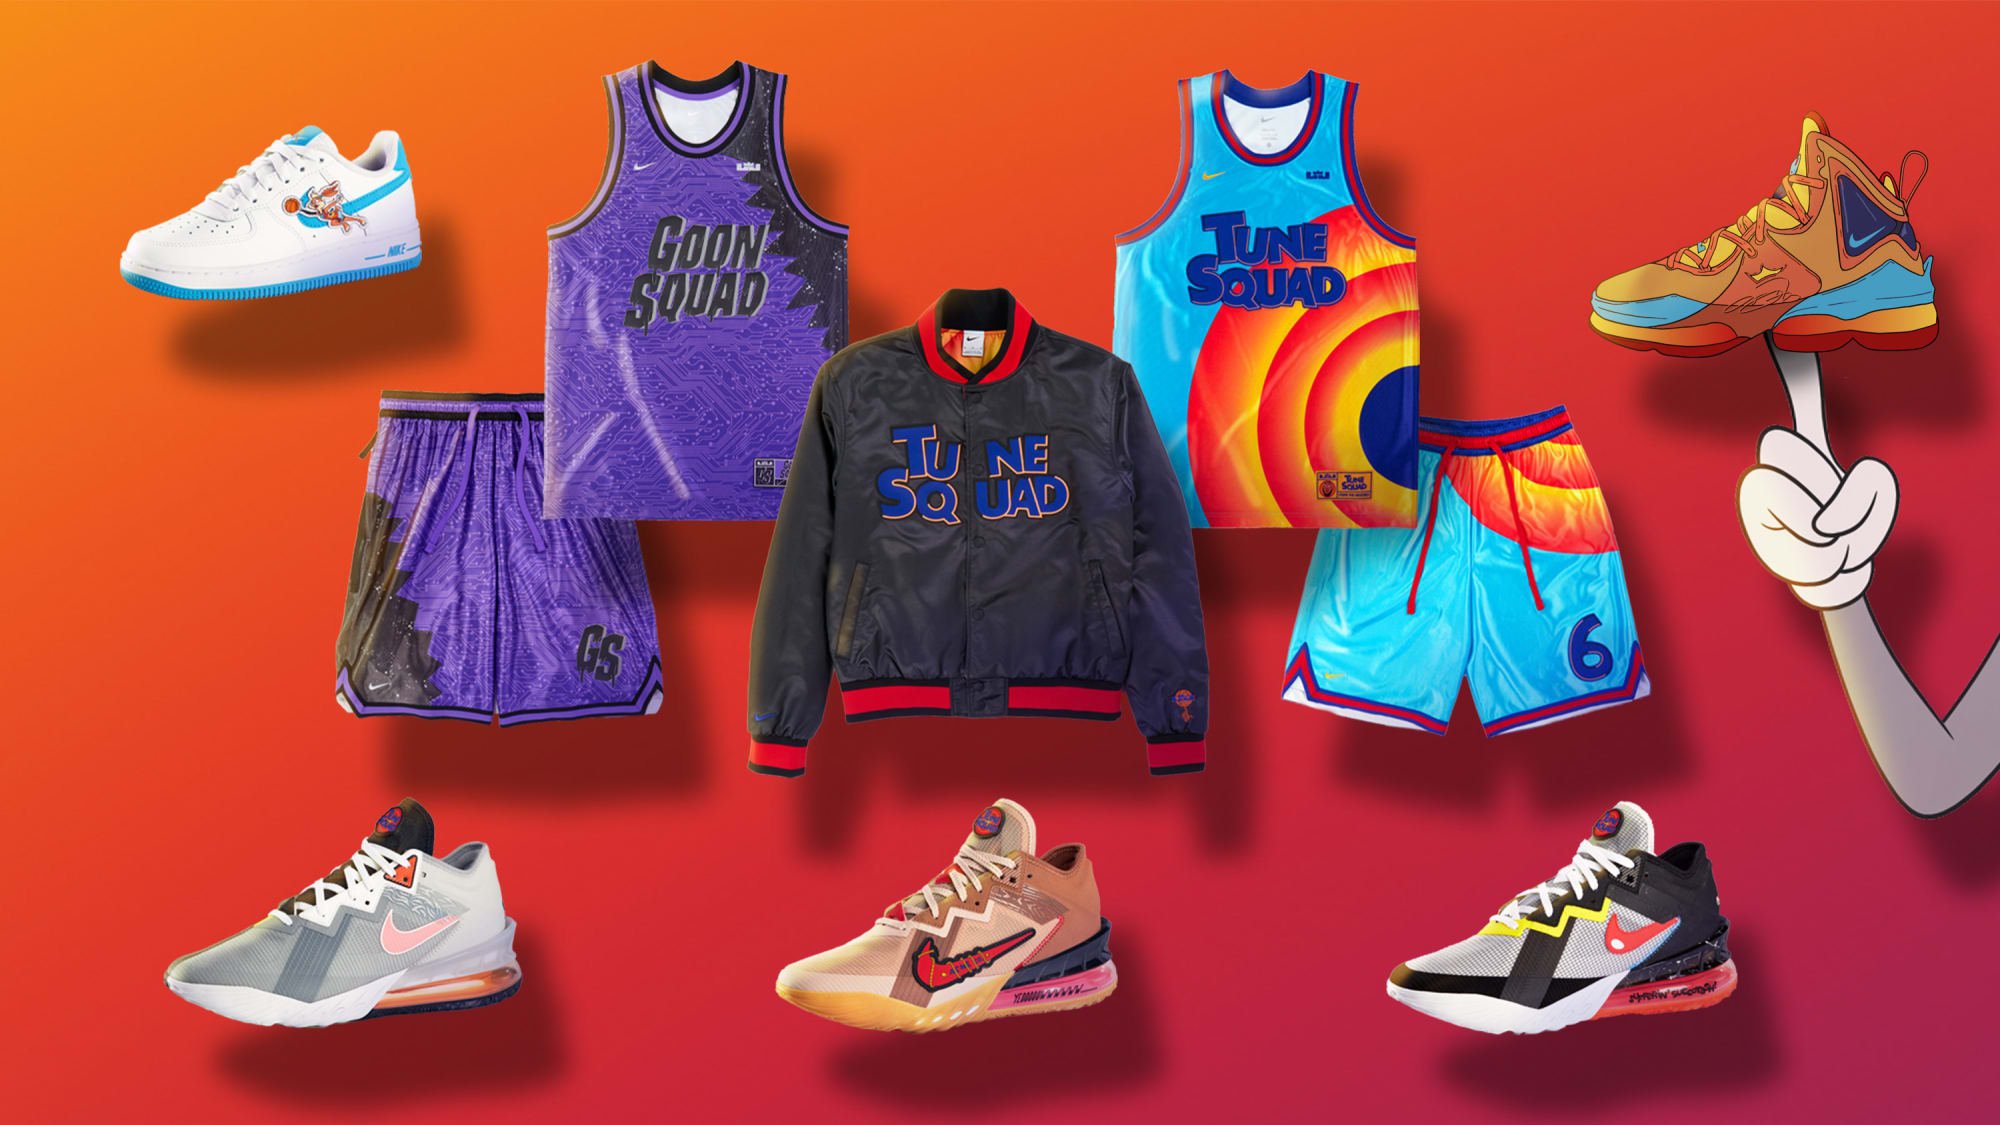 Play with LeBron James in Nike and Converse's new Space Jam collection